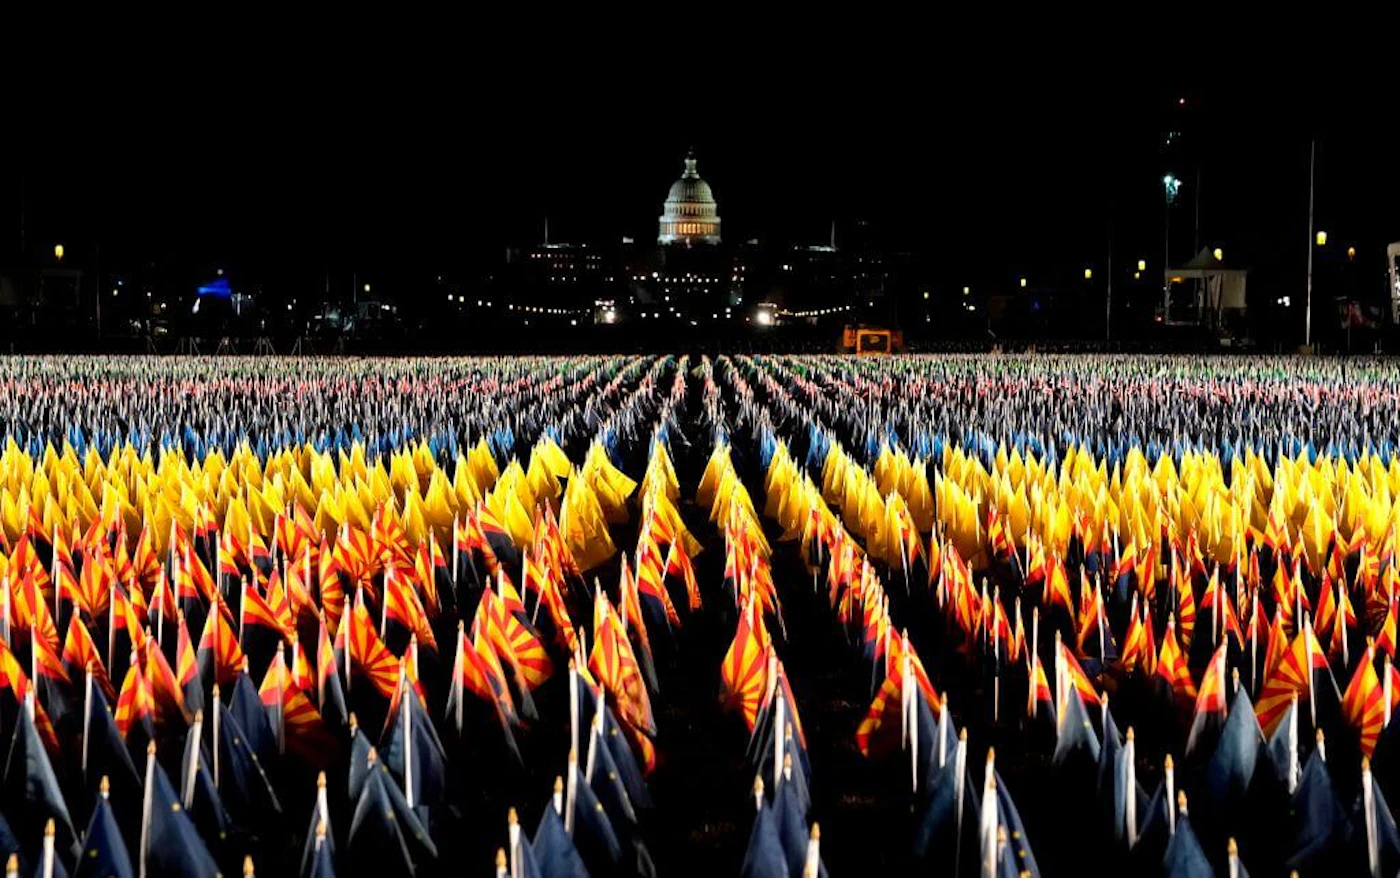 The "Field of Flags" is pictured on the National Mall as the US Capitol Building is prepared for the inauguration ceremonies for President-elect Joe Biden and Vice President-elect Kamala Harris on January 18, 2021 in Washington, DC. - President-elect Joe Biden and Vice President-elect Kamala Harris will be sworn into office January 20, 2021.